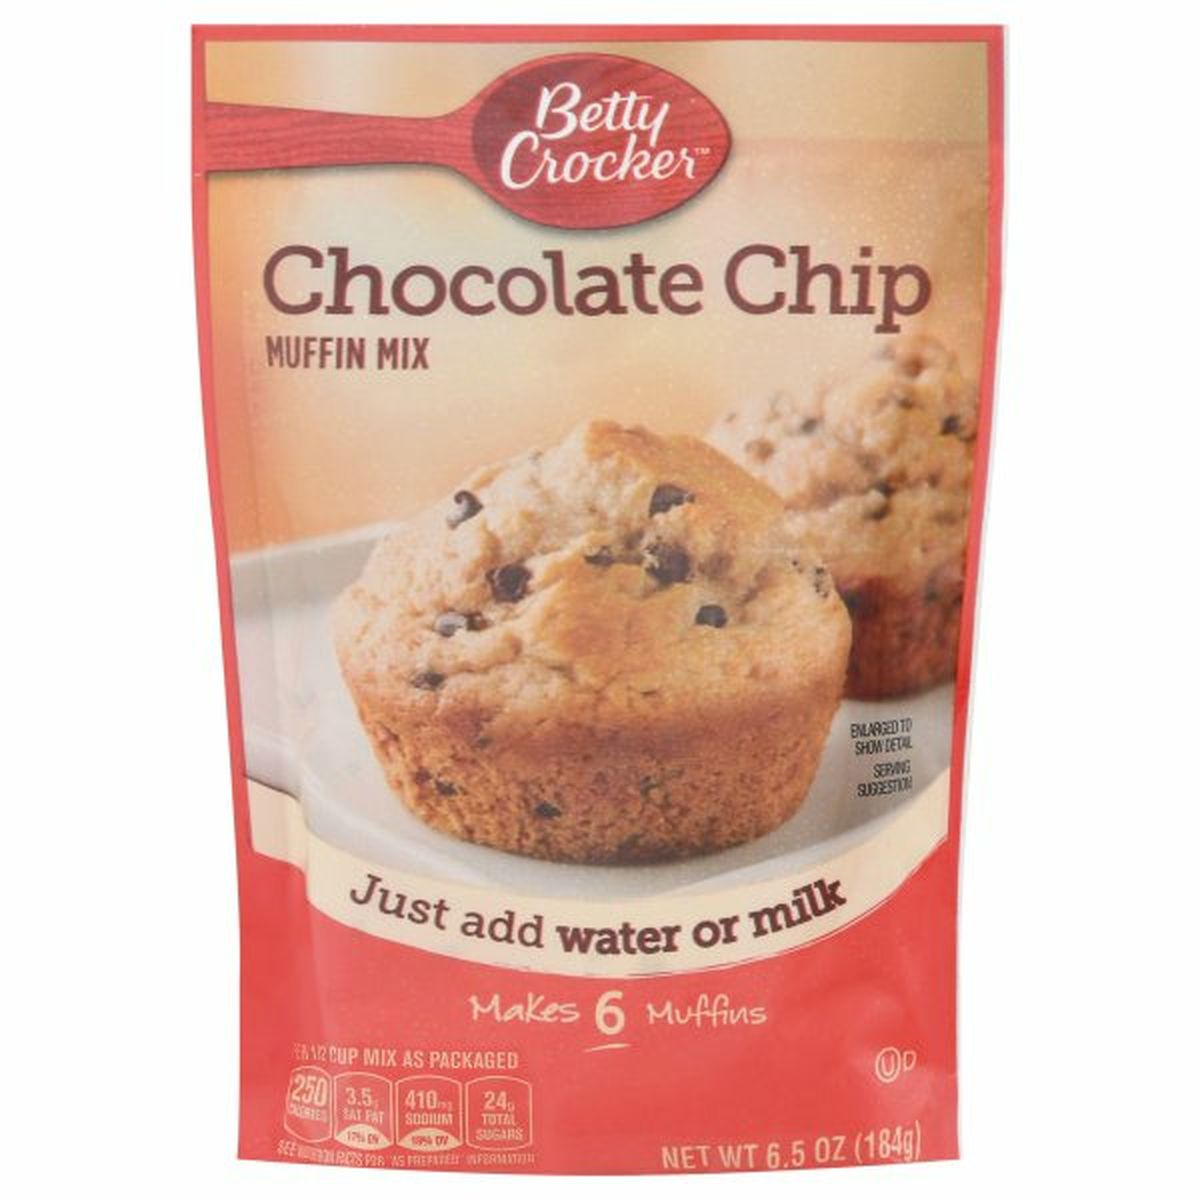 Calories in Betty Crocker Muffin Mix, Chocolate Chip